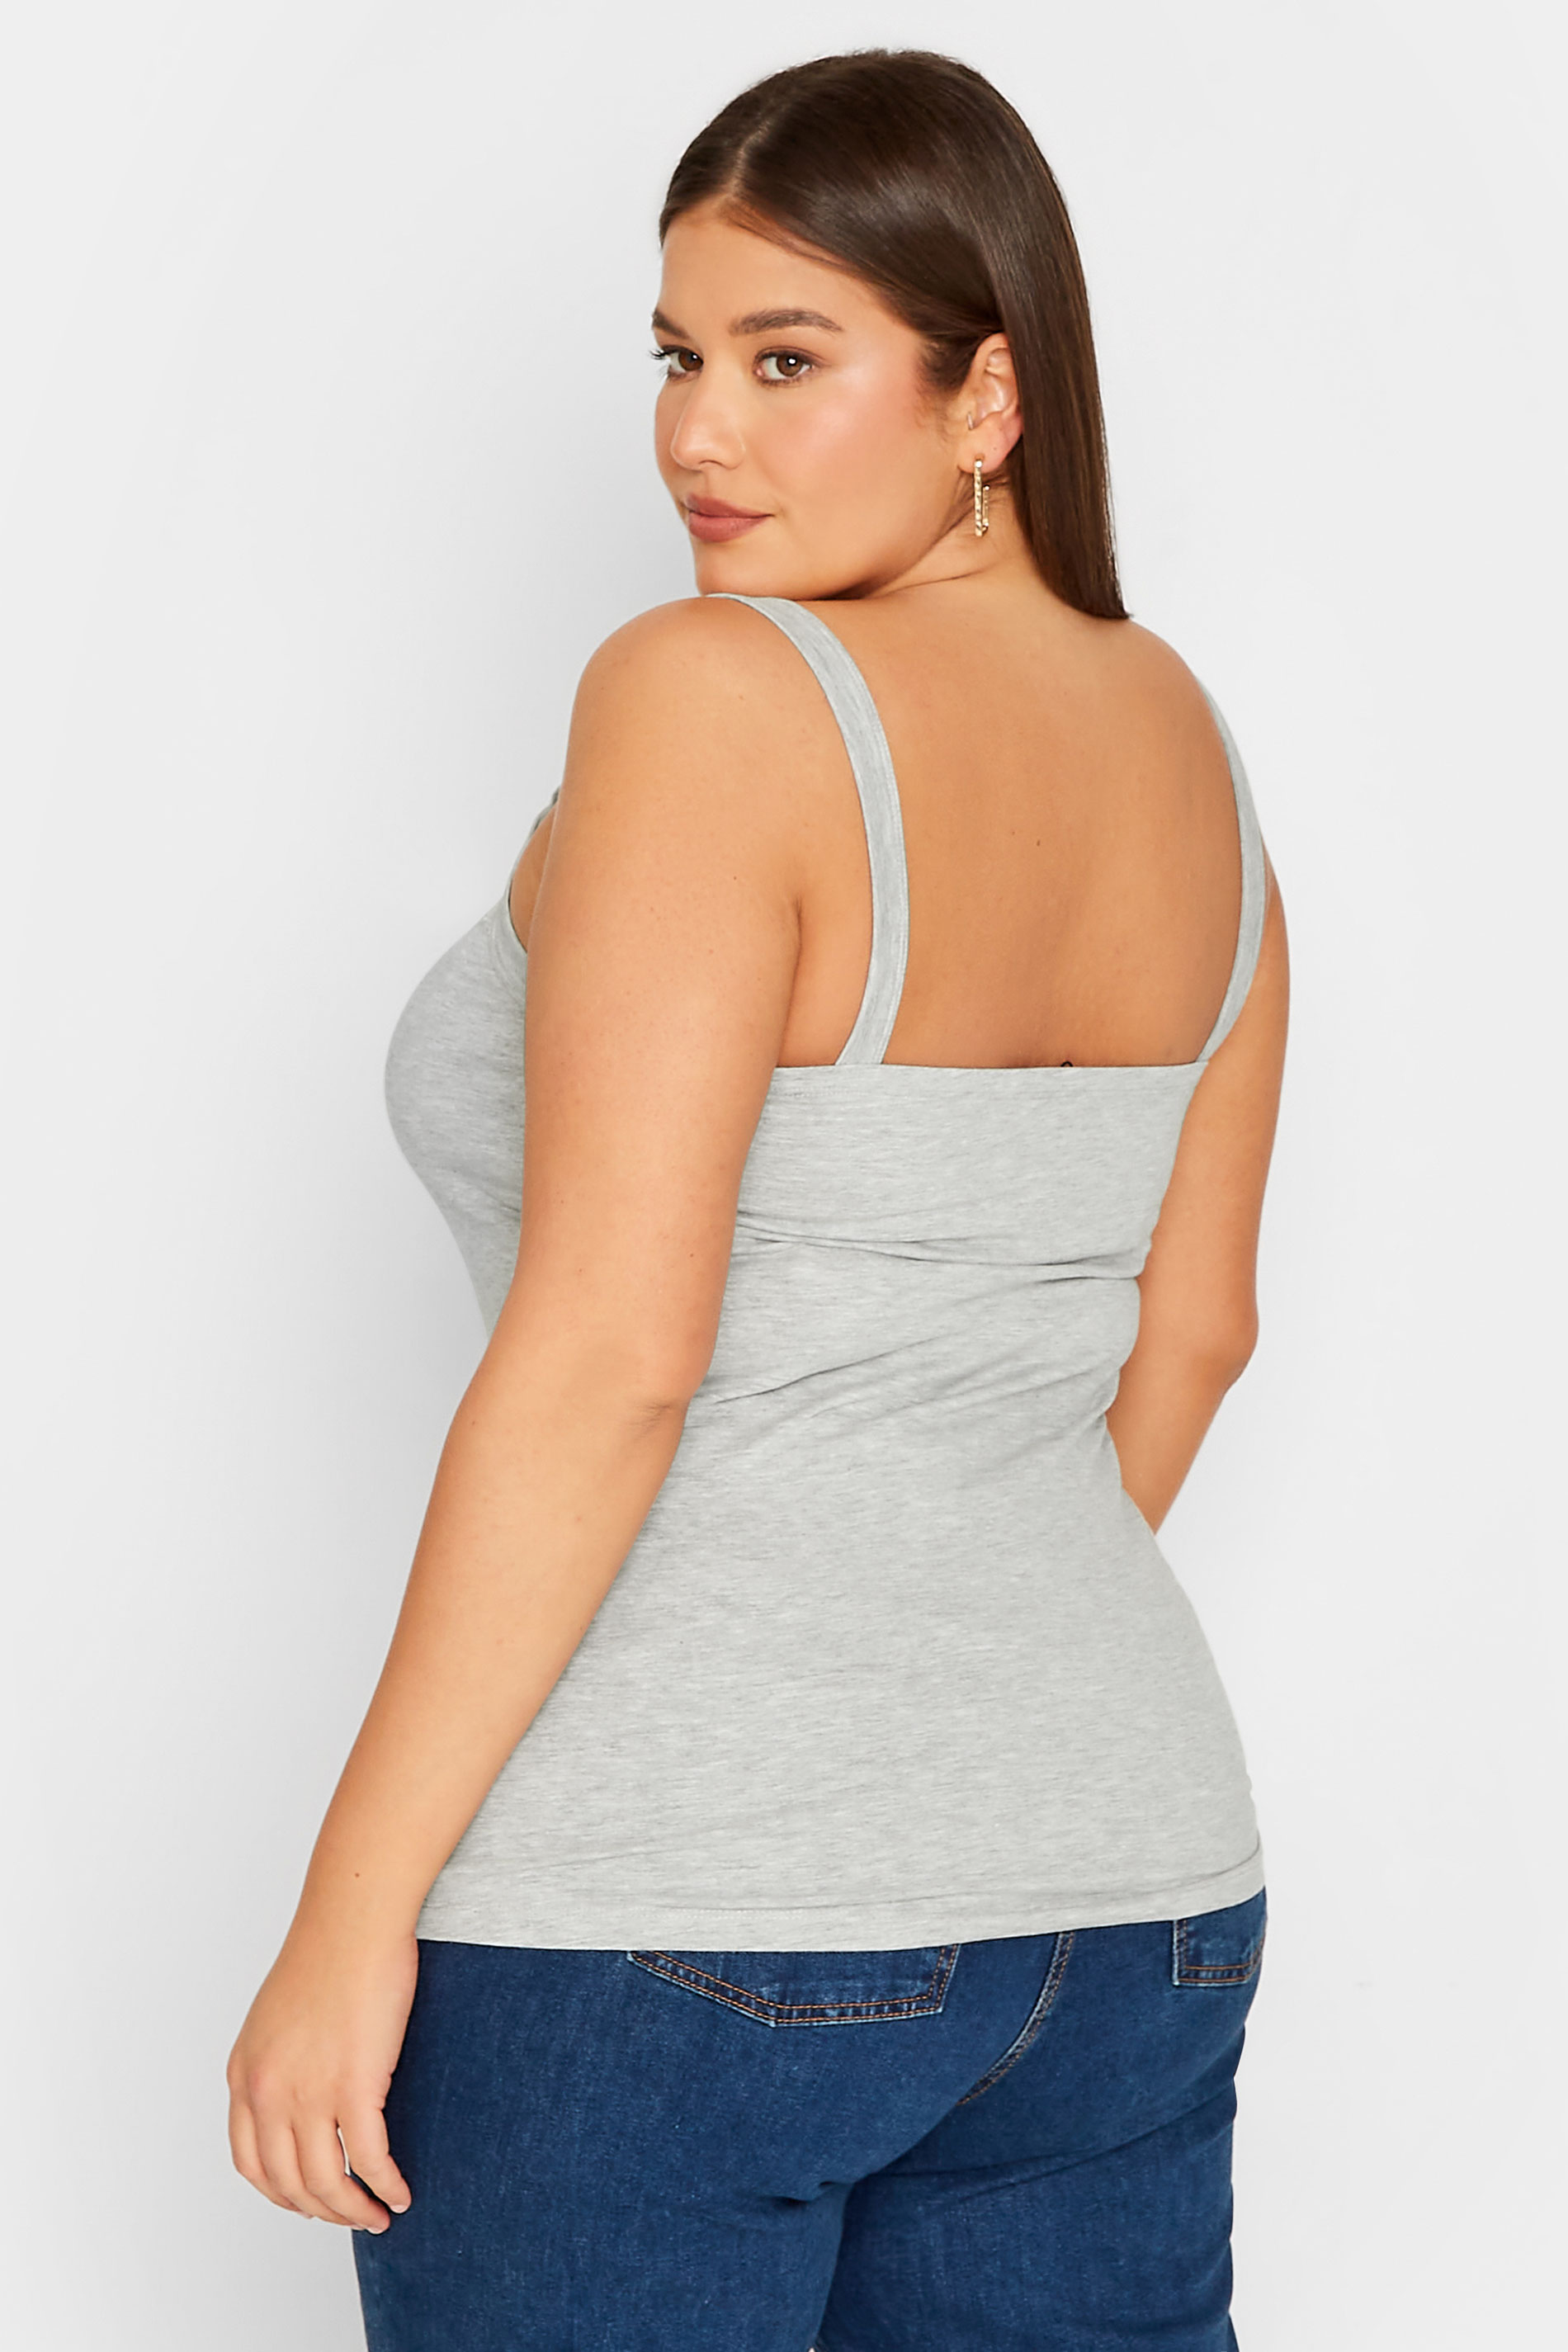 LTS Tall Women's Grey Marl Square Neck Vest Top | Long Tall Sally 3